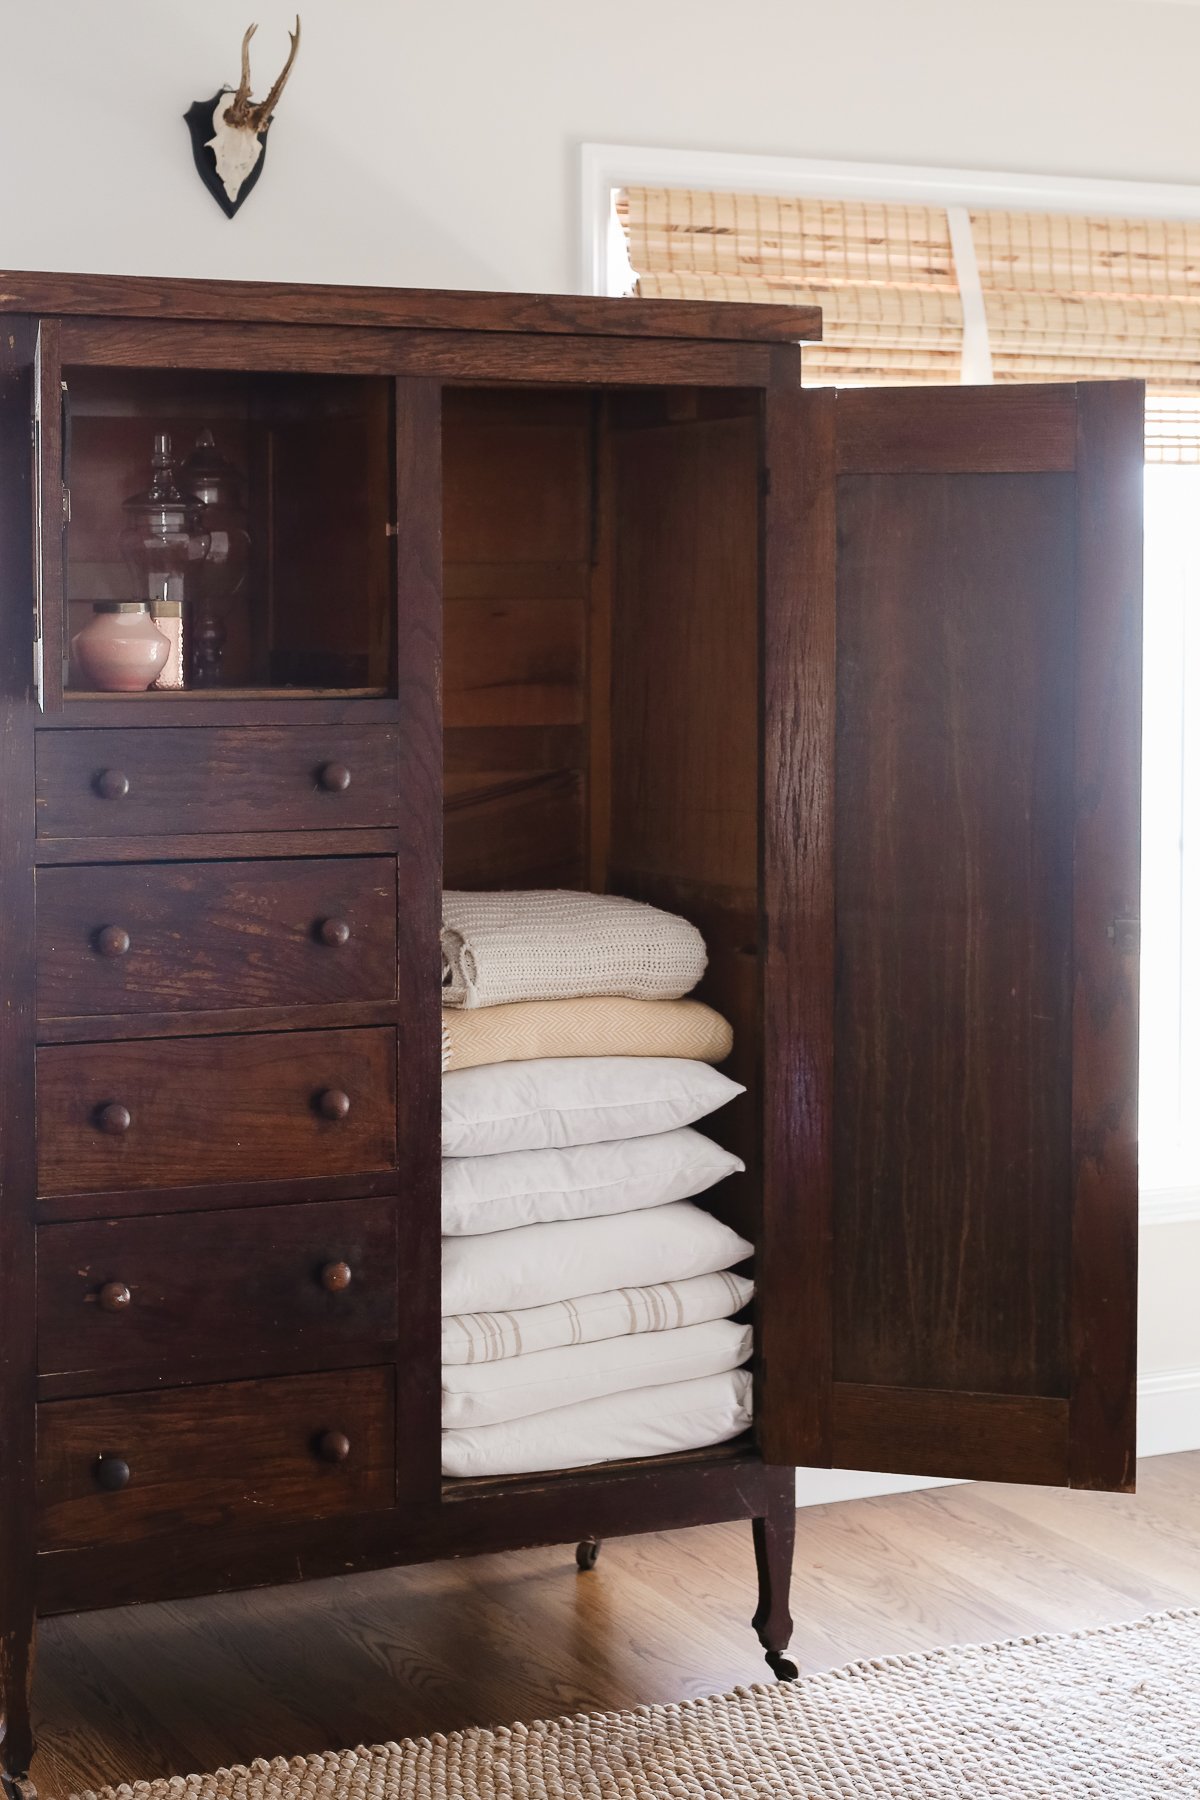 A dark wood linen cabinet in a family room space, with the door opened to reveal the interior storage.